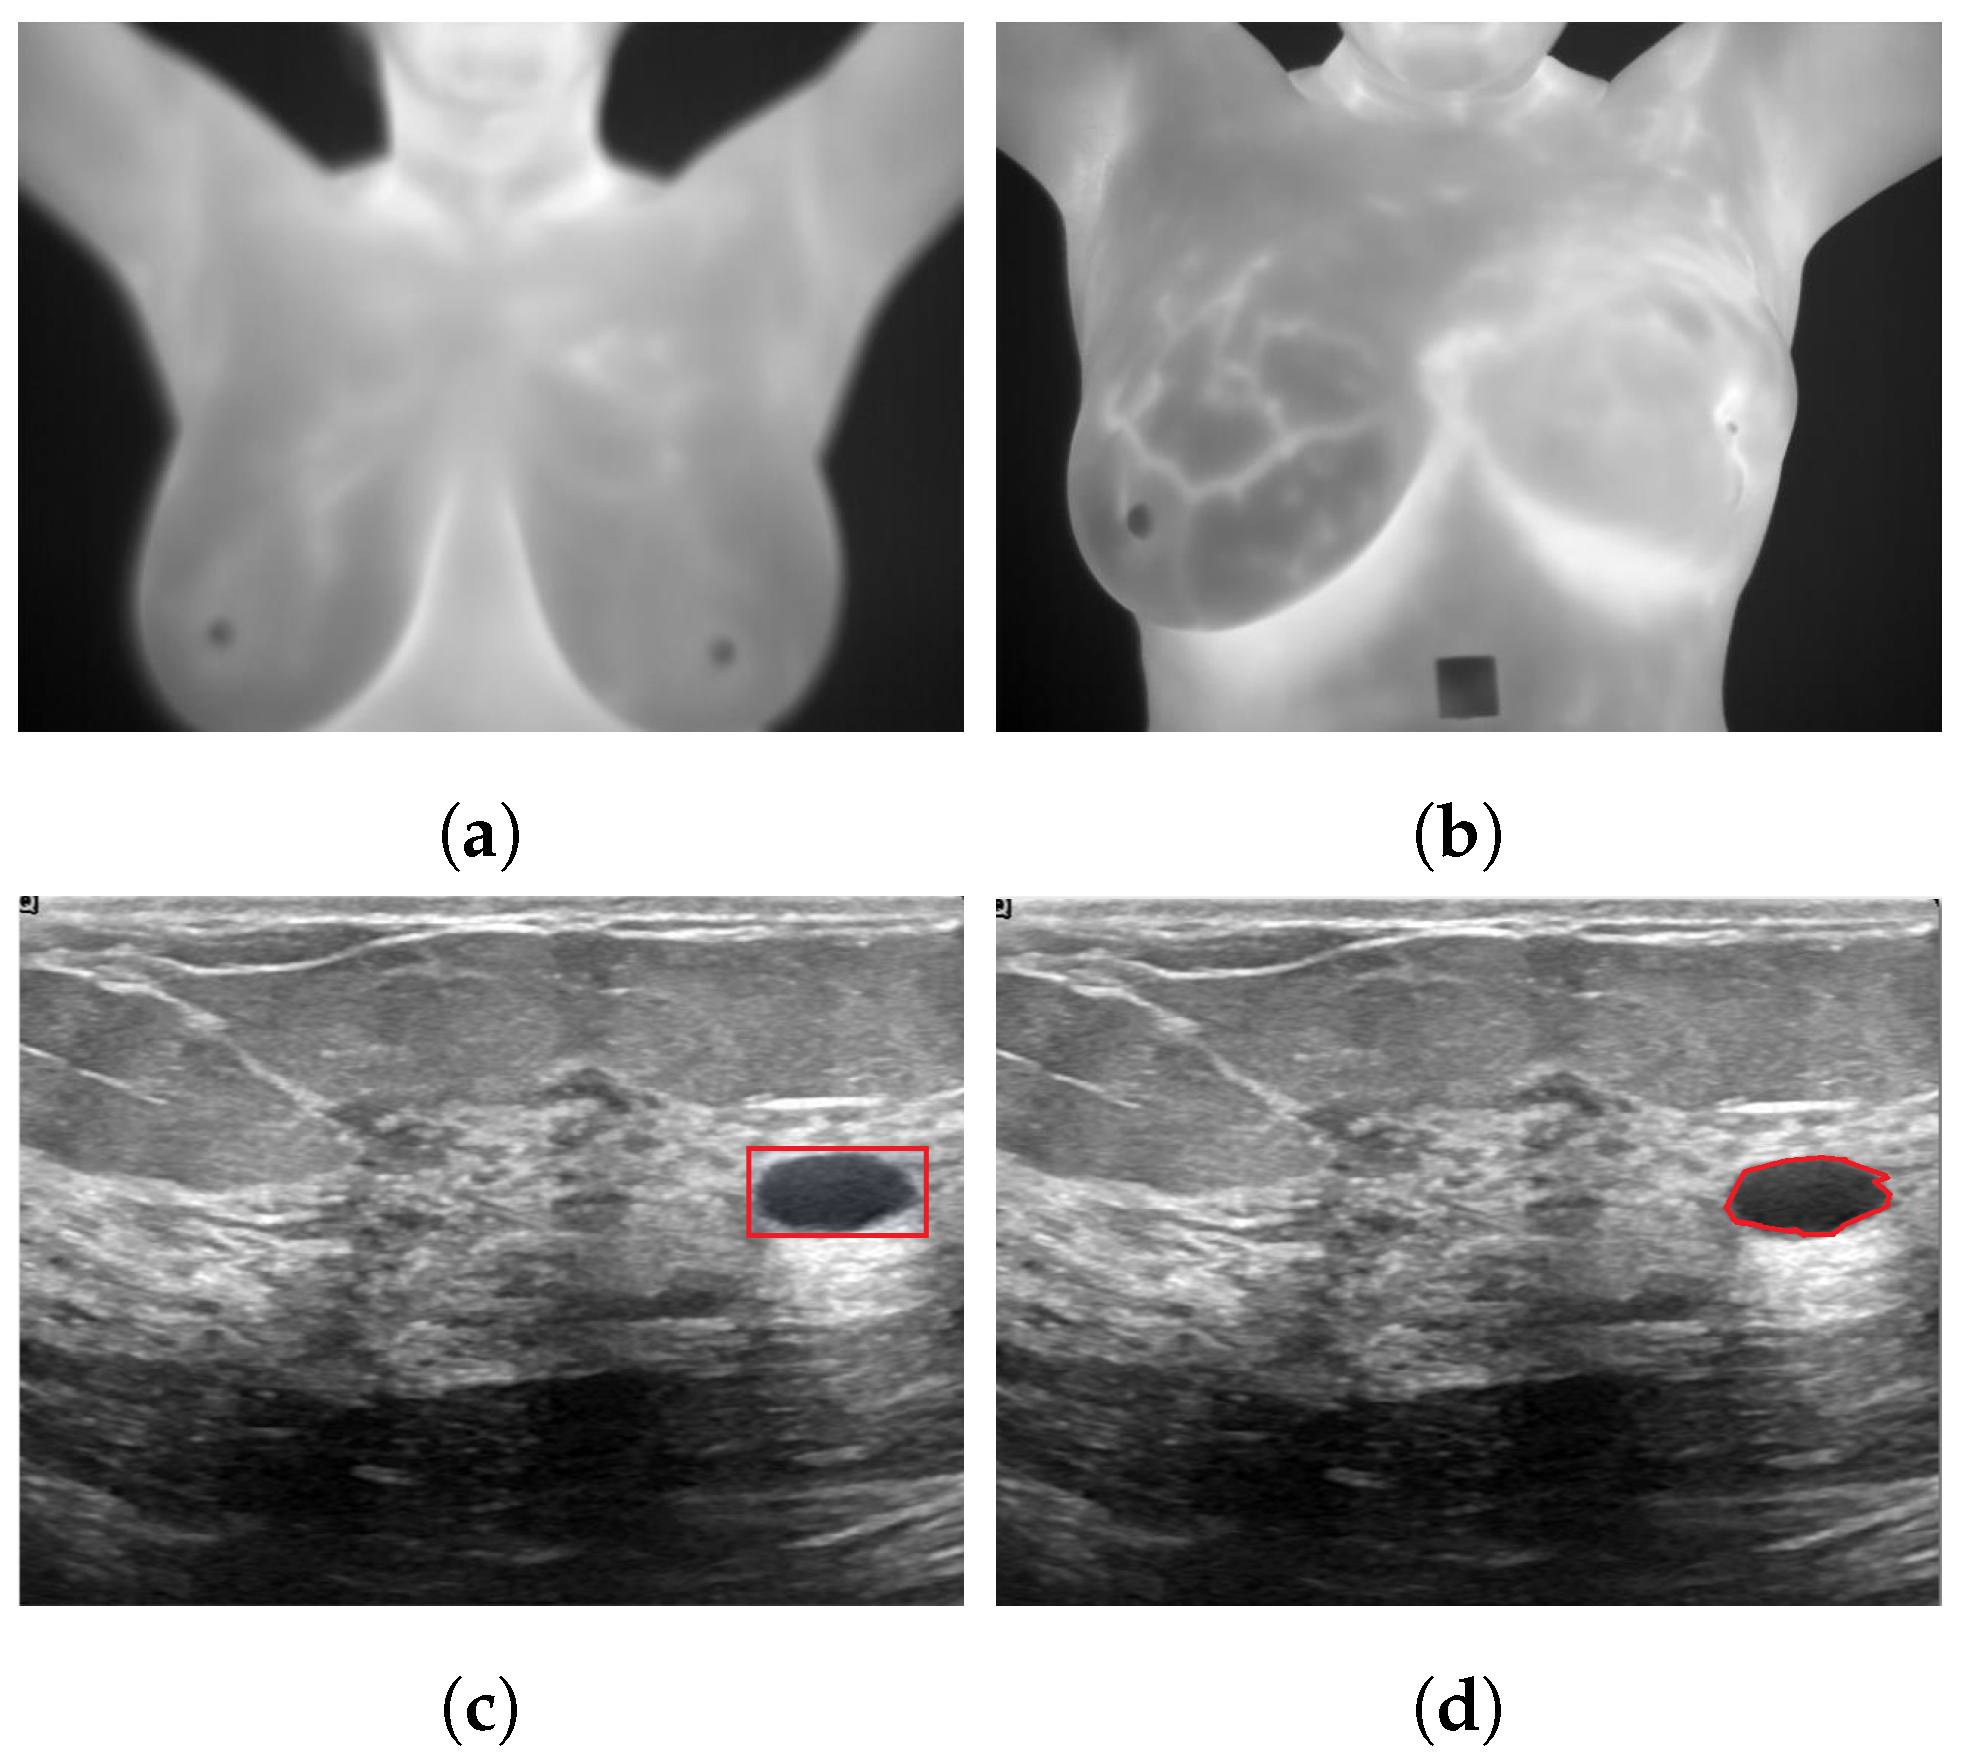 A -Preoperative examination showing evident breast size asymmetry; B